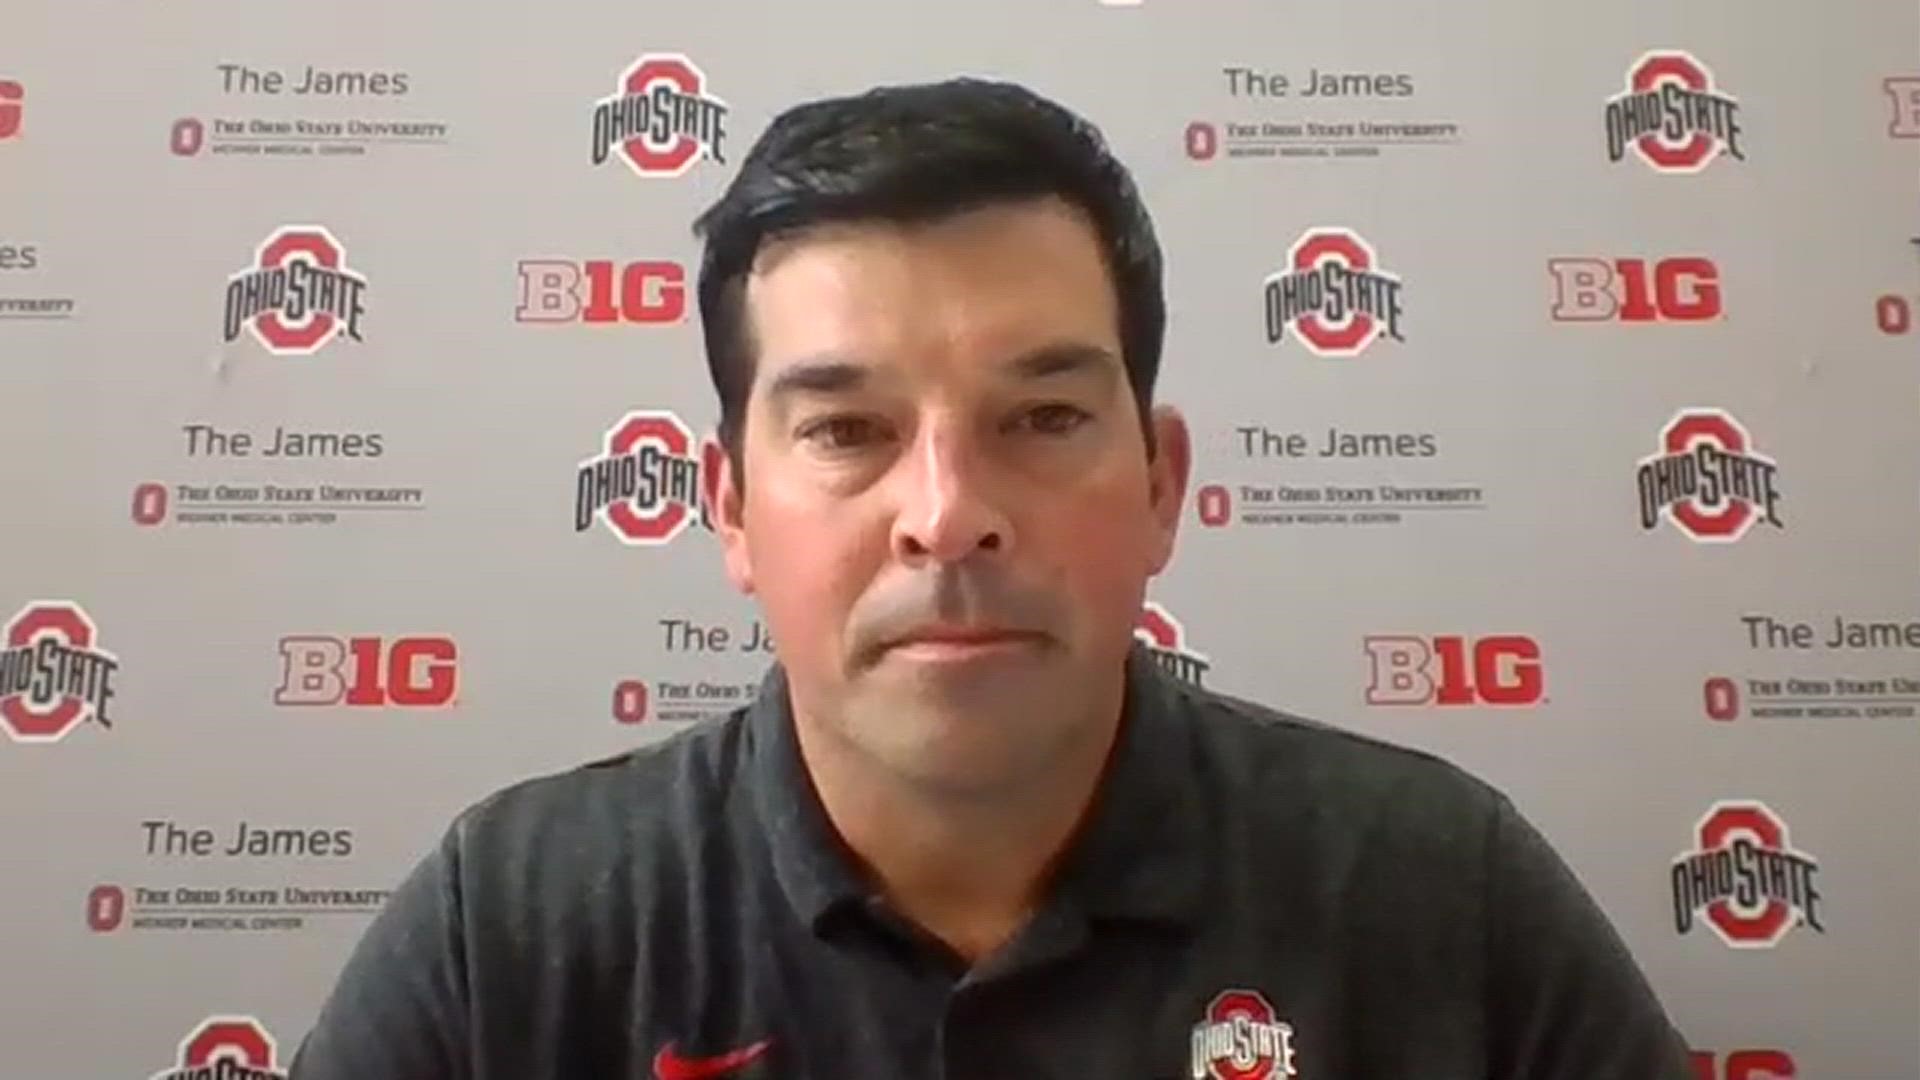 Ohio State head coach Ryan Day provides an update on his team as they prepare to start the 2020 season this month.